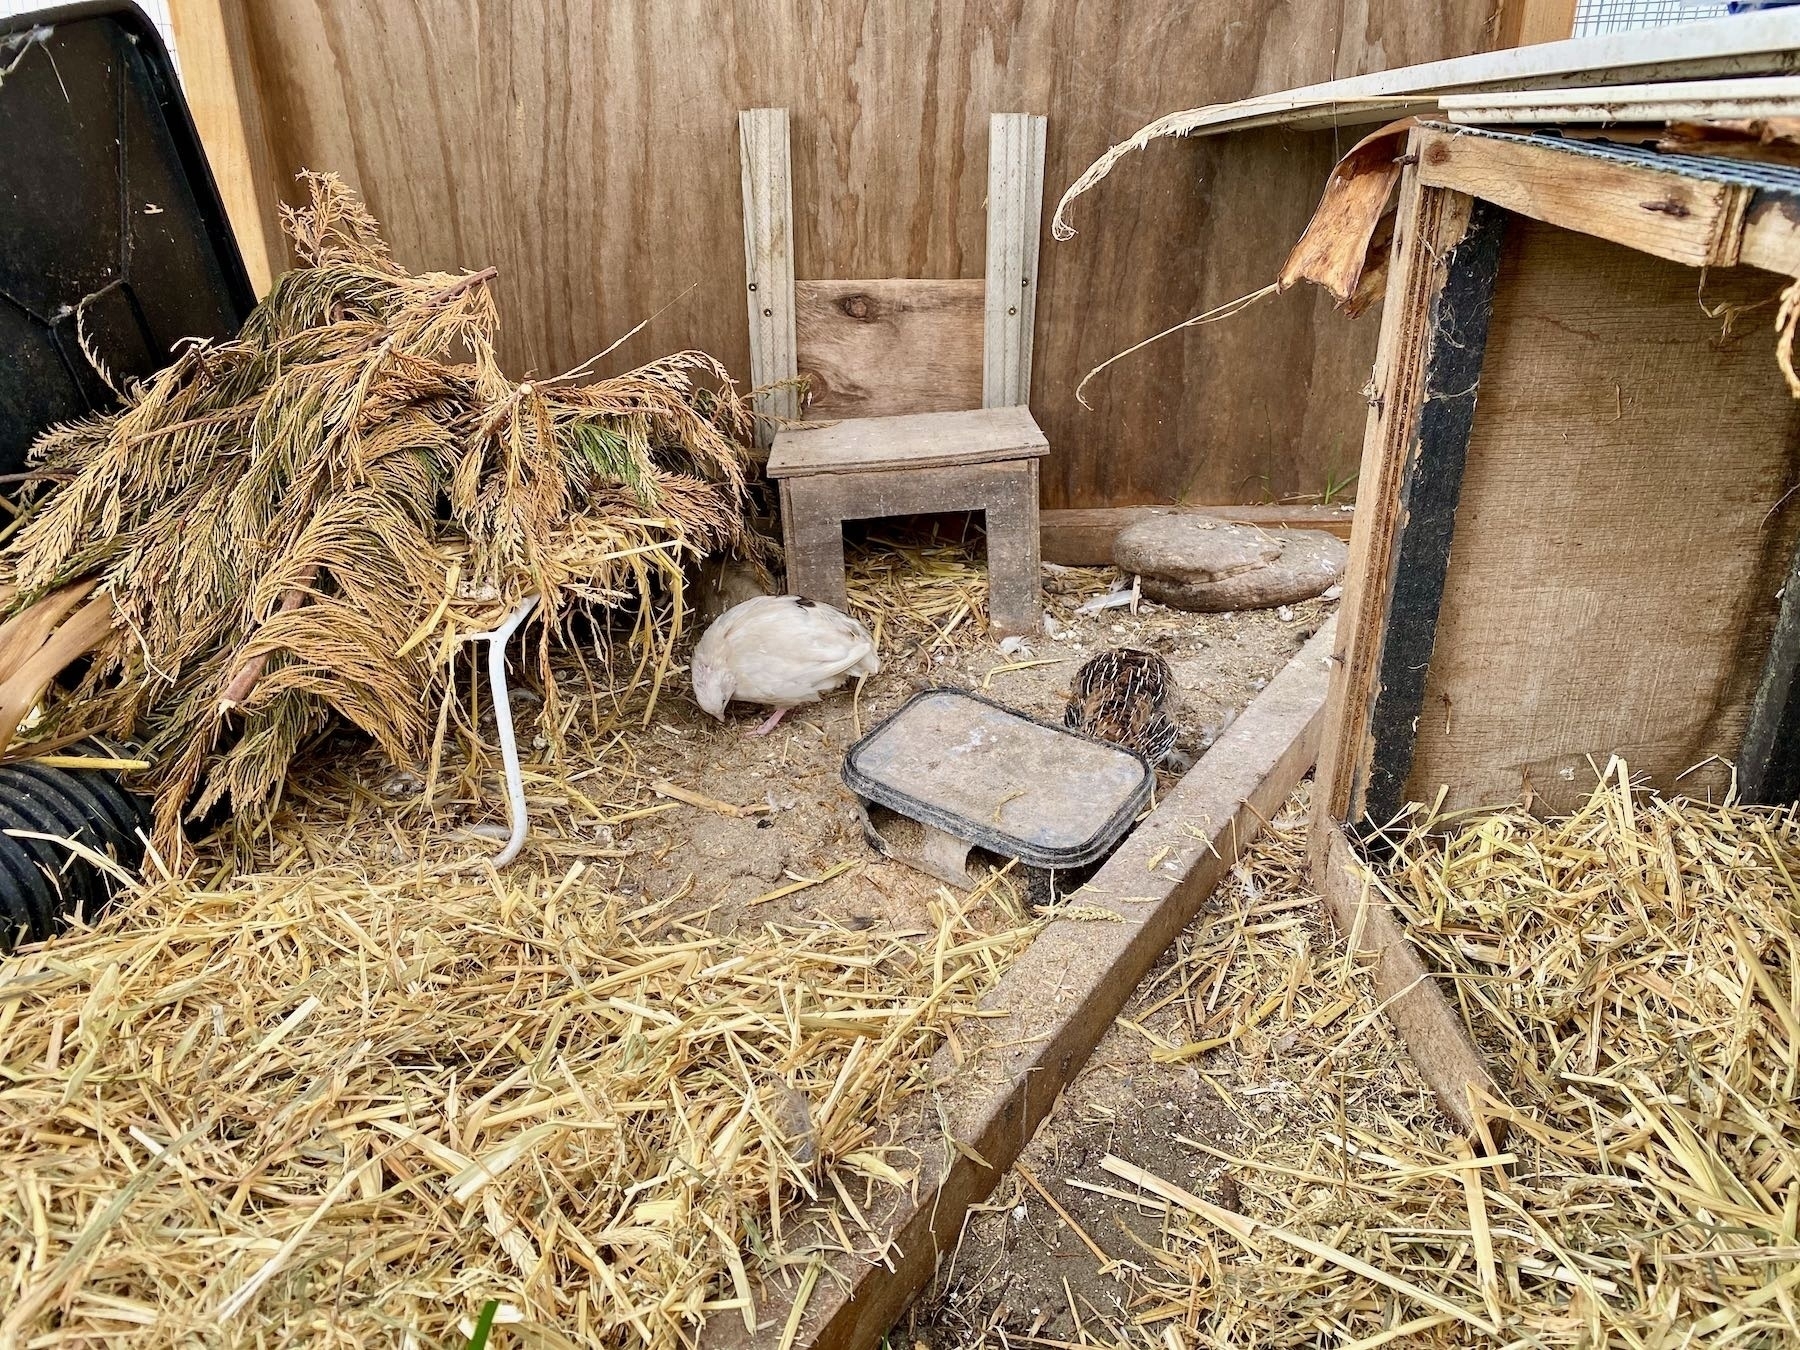 Two quail by the food bowl. 